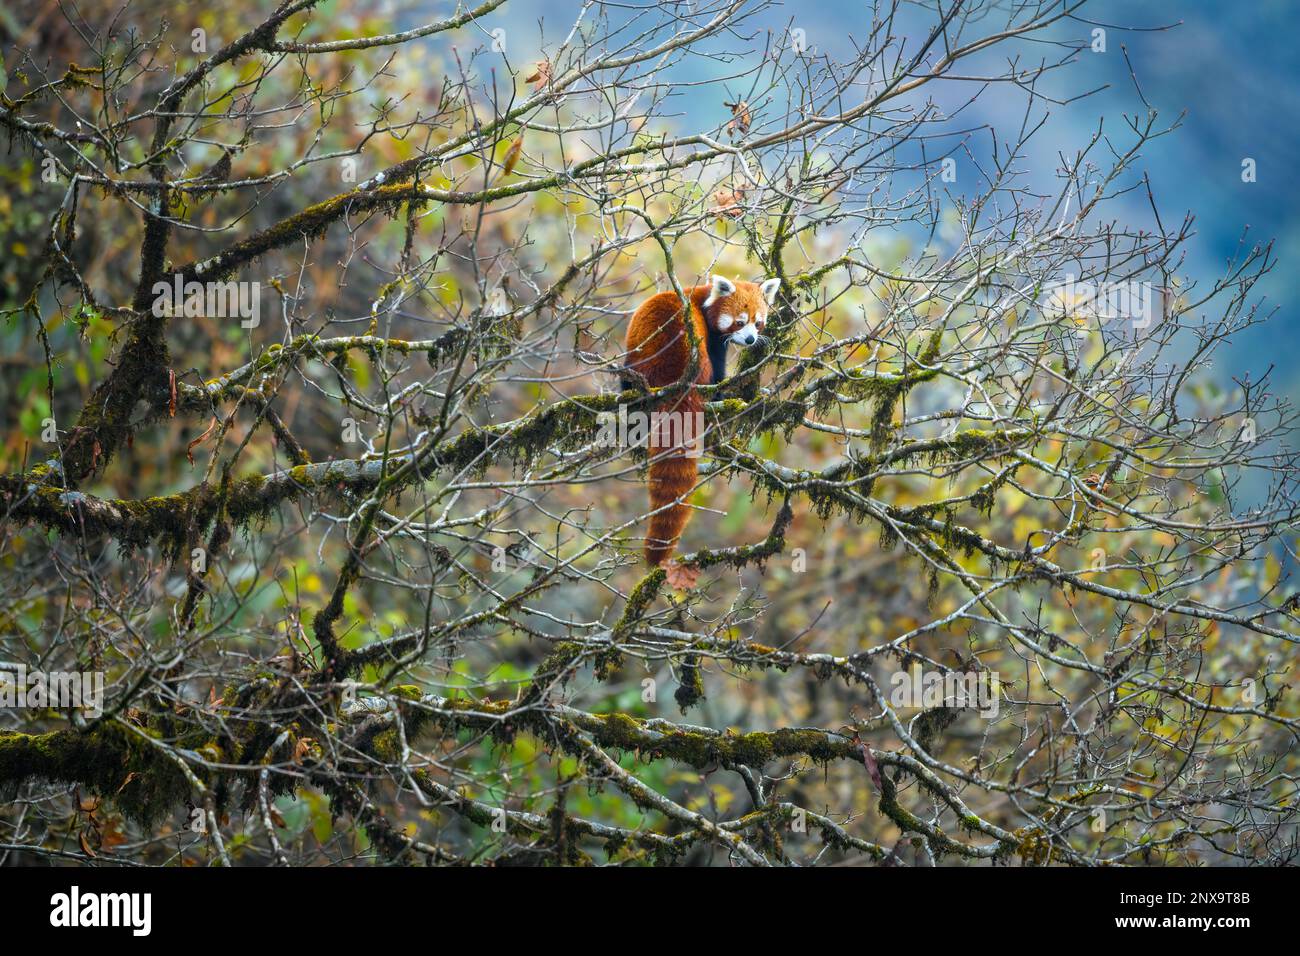 A red panda female in her habitat perched upon a mossy oak nut tree inside an Himalayan valley Stock Photo